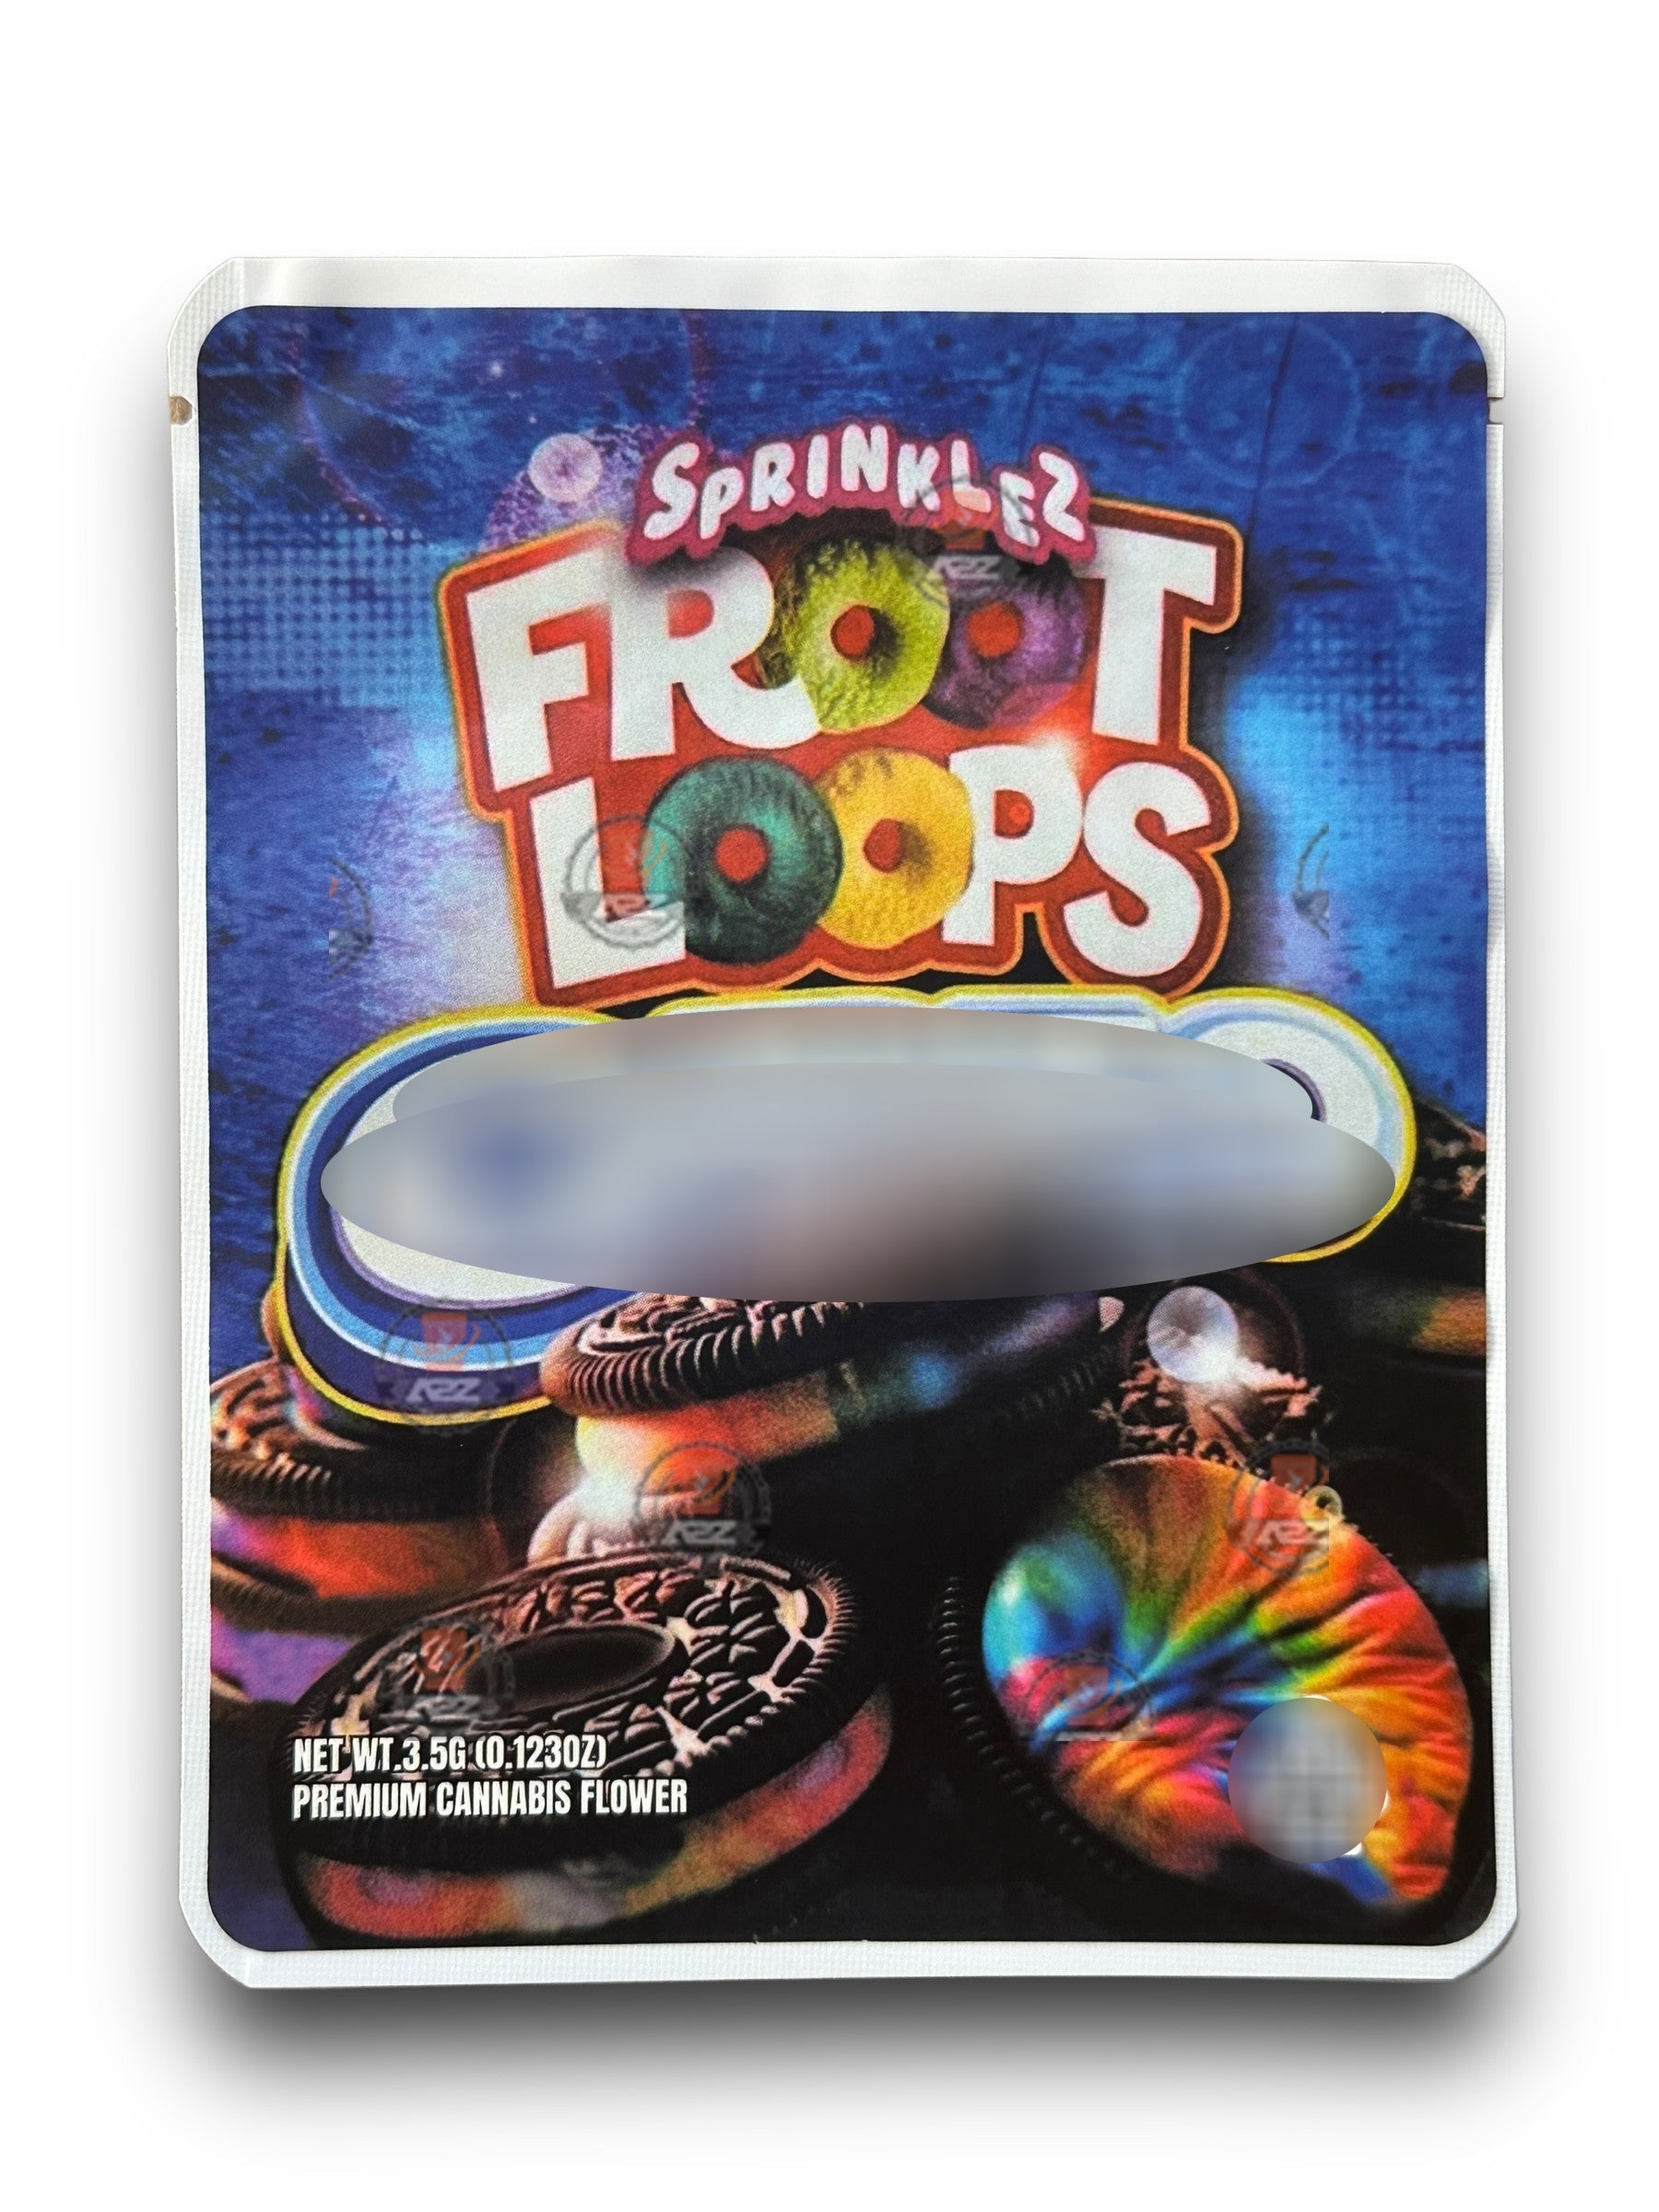 Sprinklez Froot Loops 3.5G Mylar Bags -With stickers and label